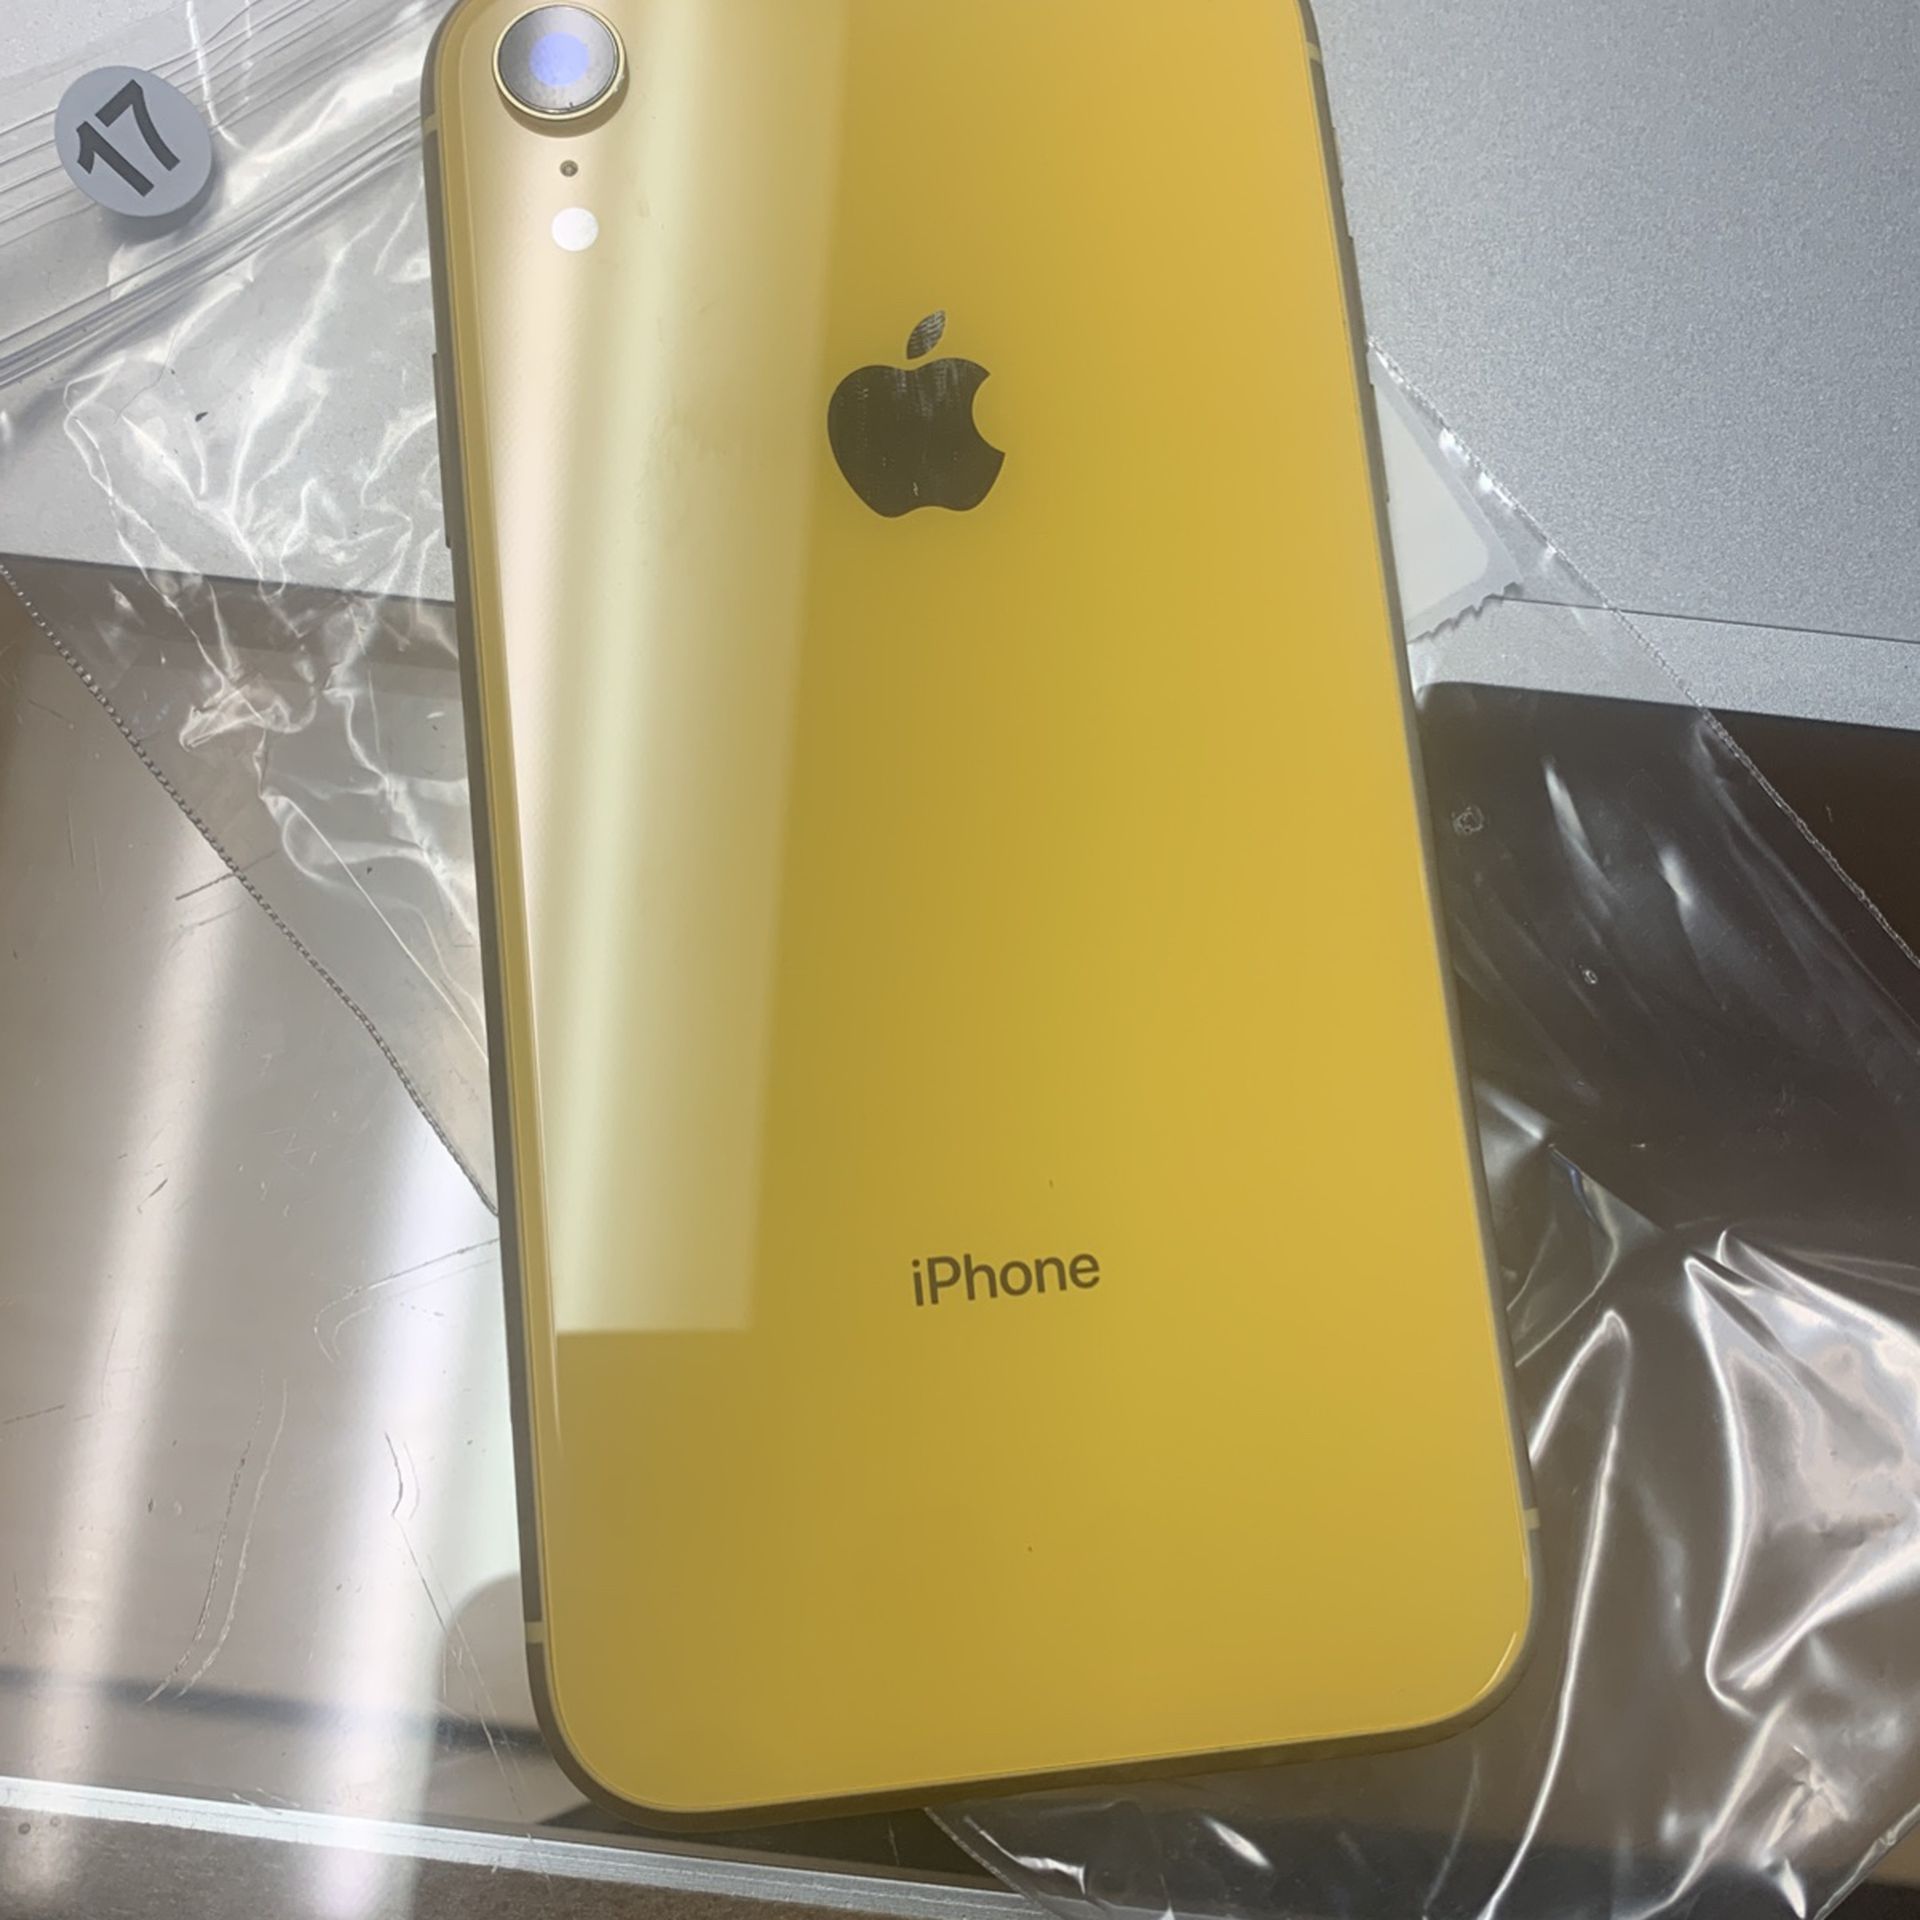 iPhone XR 64gb Yellow (unlocked) for Sale in Denver, CO - OfferUp